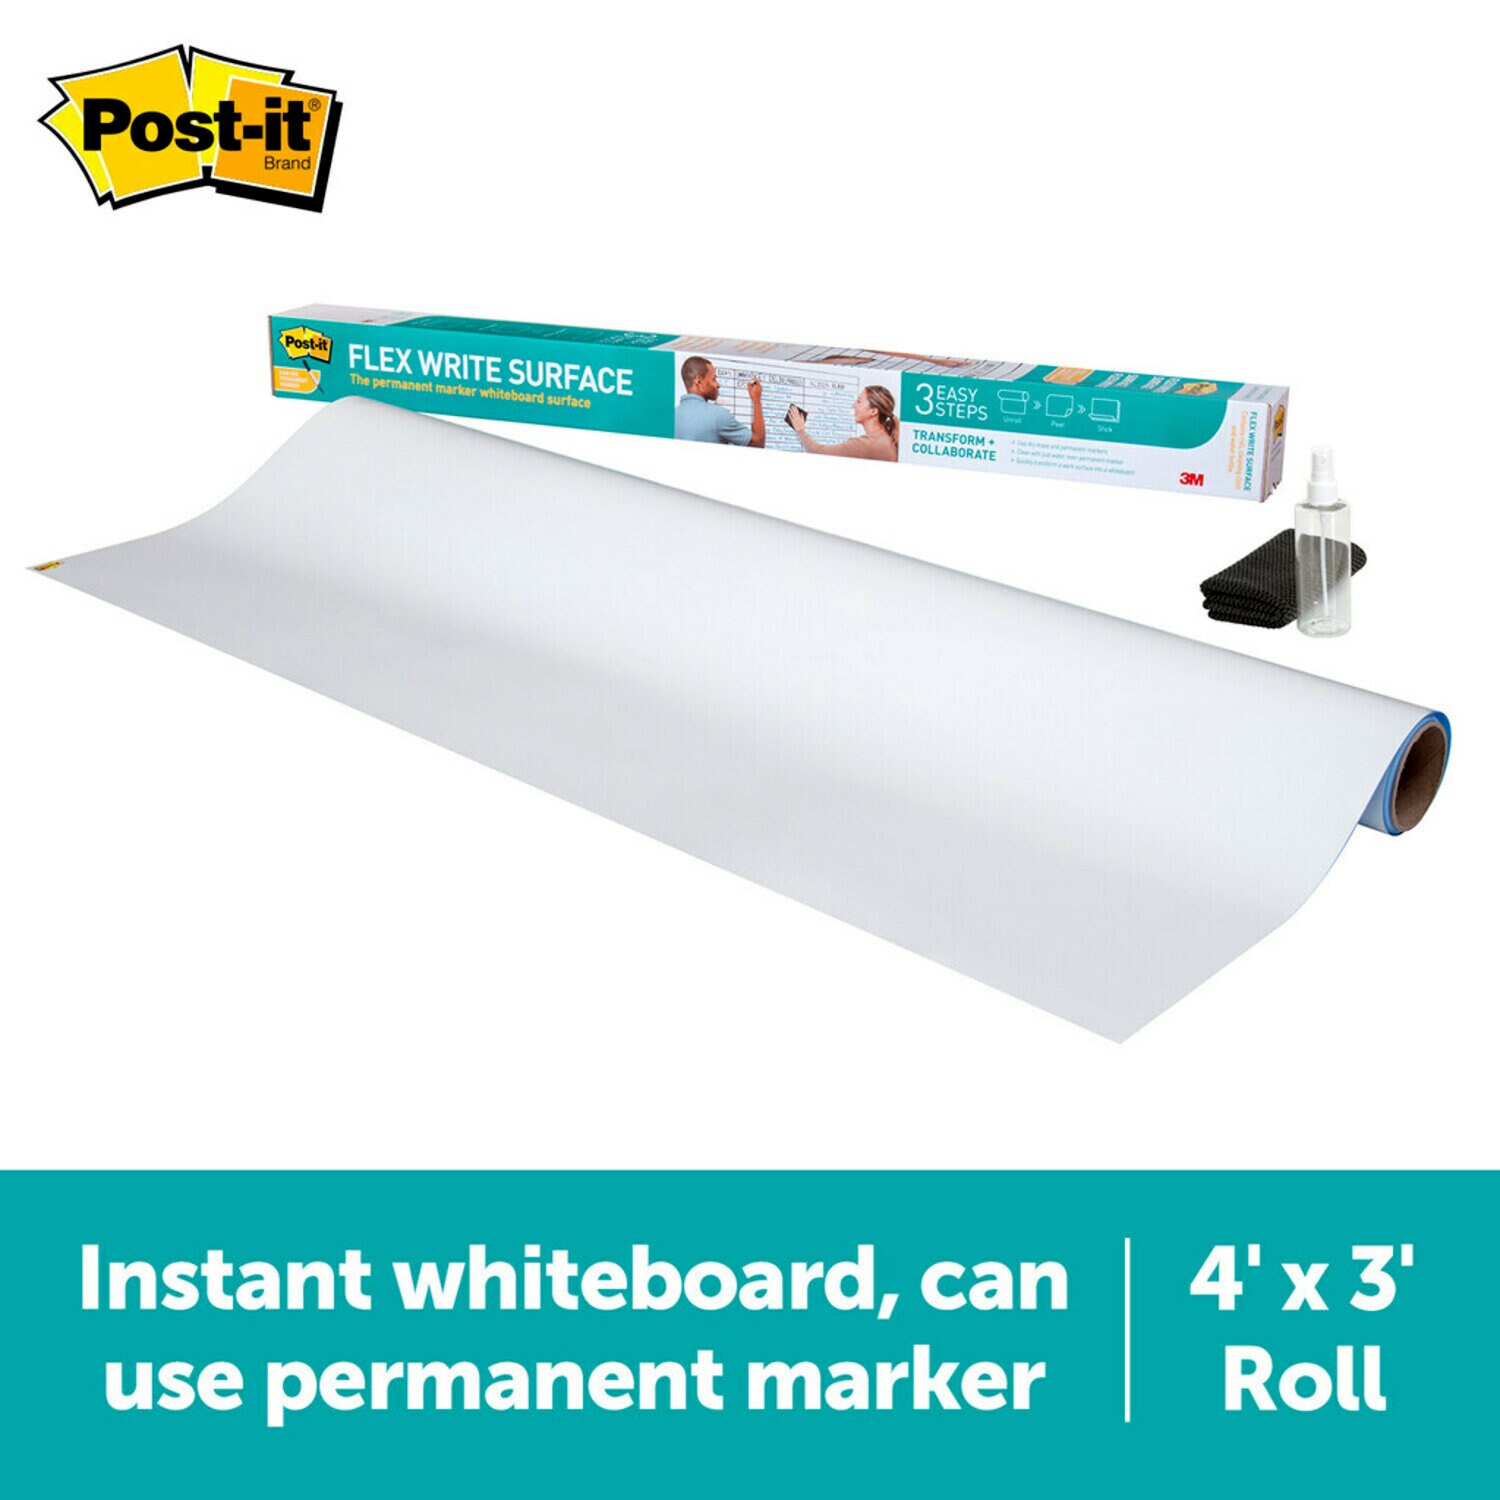 7100197624 - Post-it Flex Write Surface, The Permanent Marker Whiteboard Surface, 4
ft. x 3 ft.